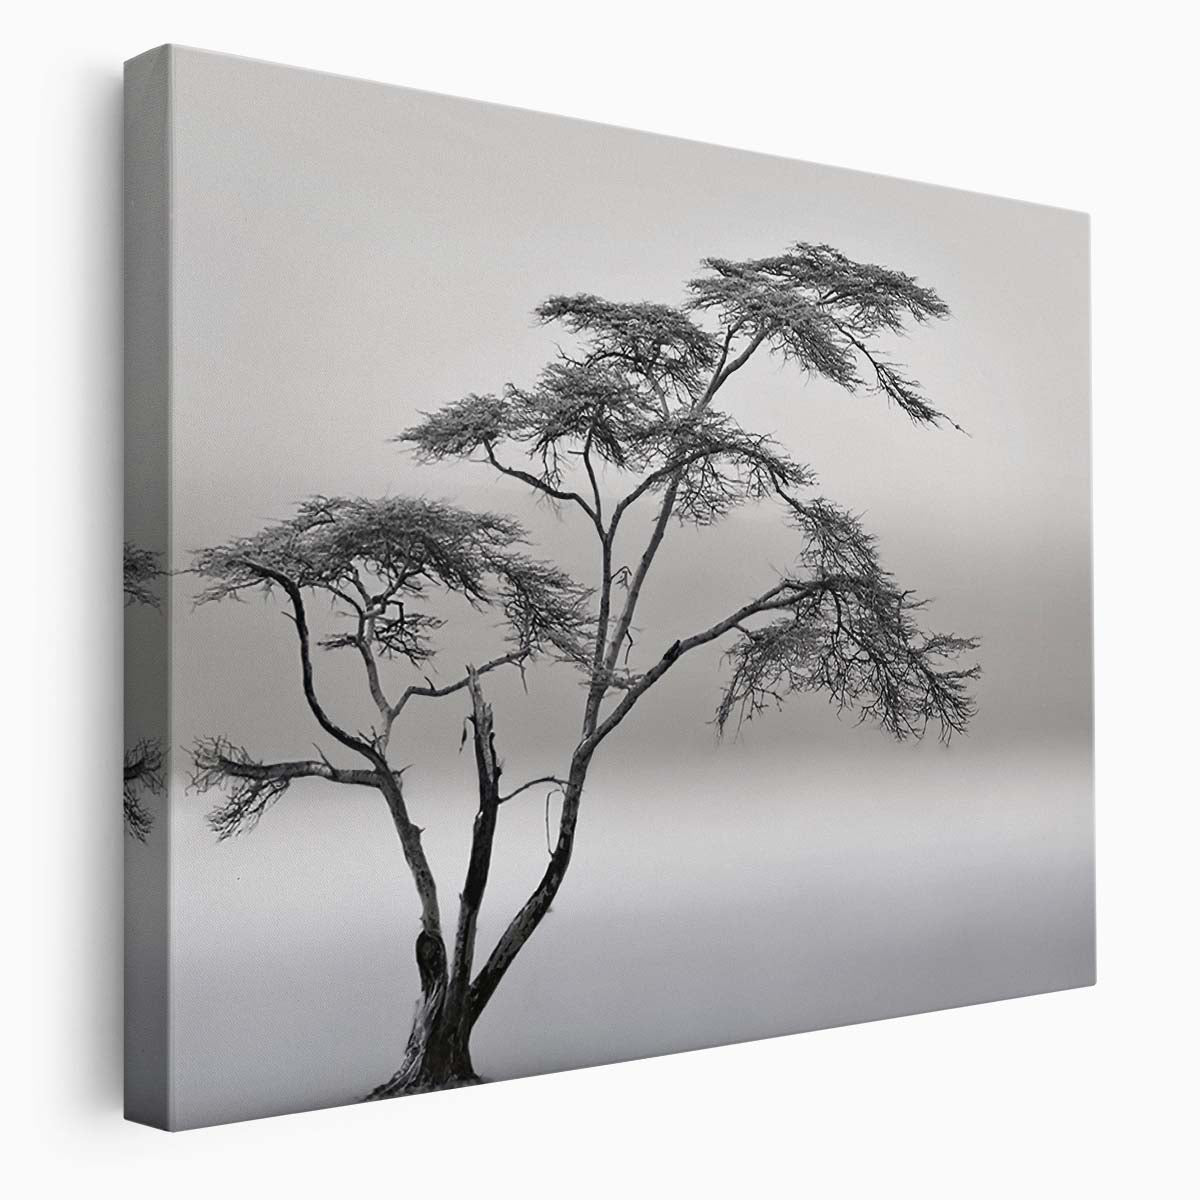 Misty Savannah Lonely Tree Monochrome Landscape Wall Art by Luxuriance Designs. Made in USA.